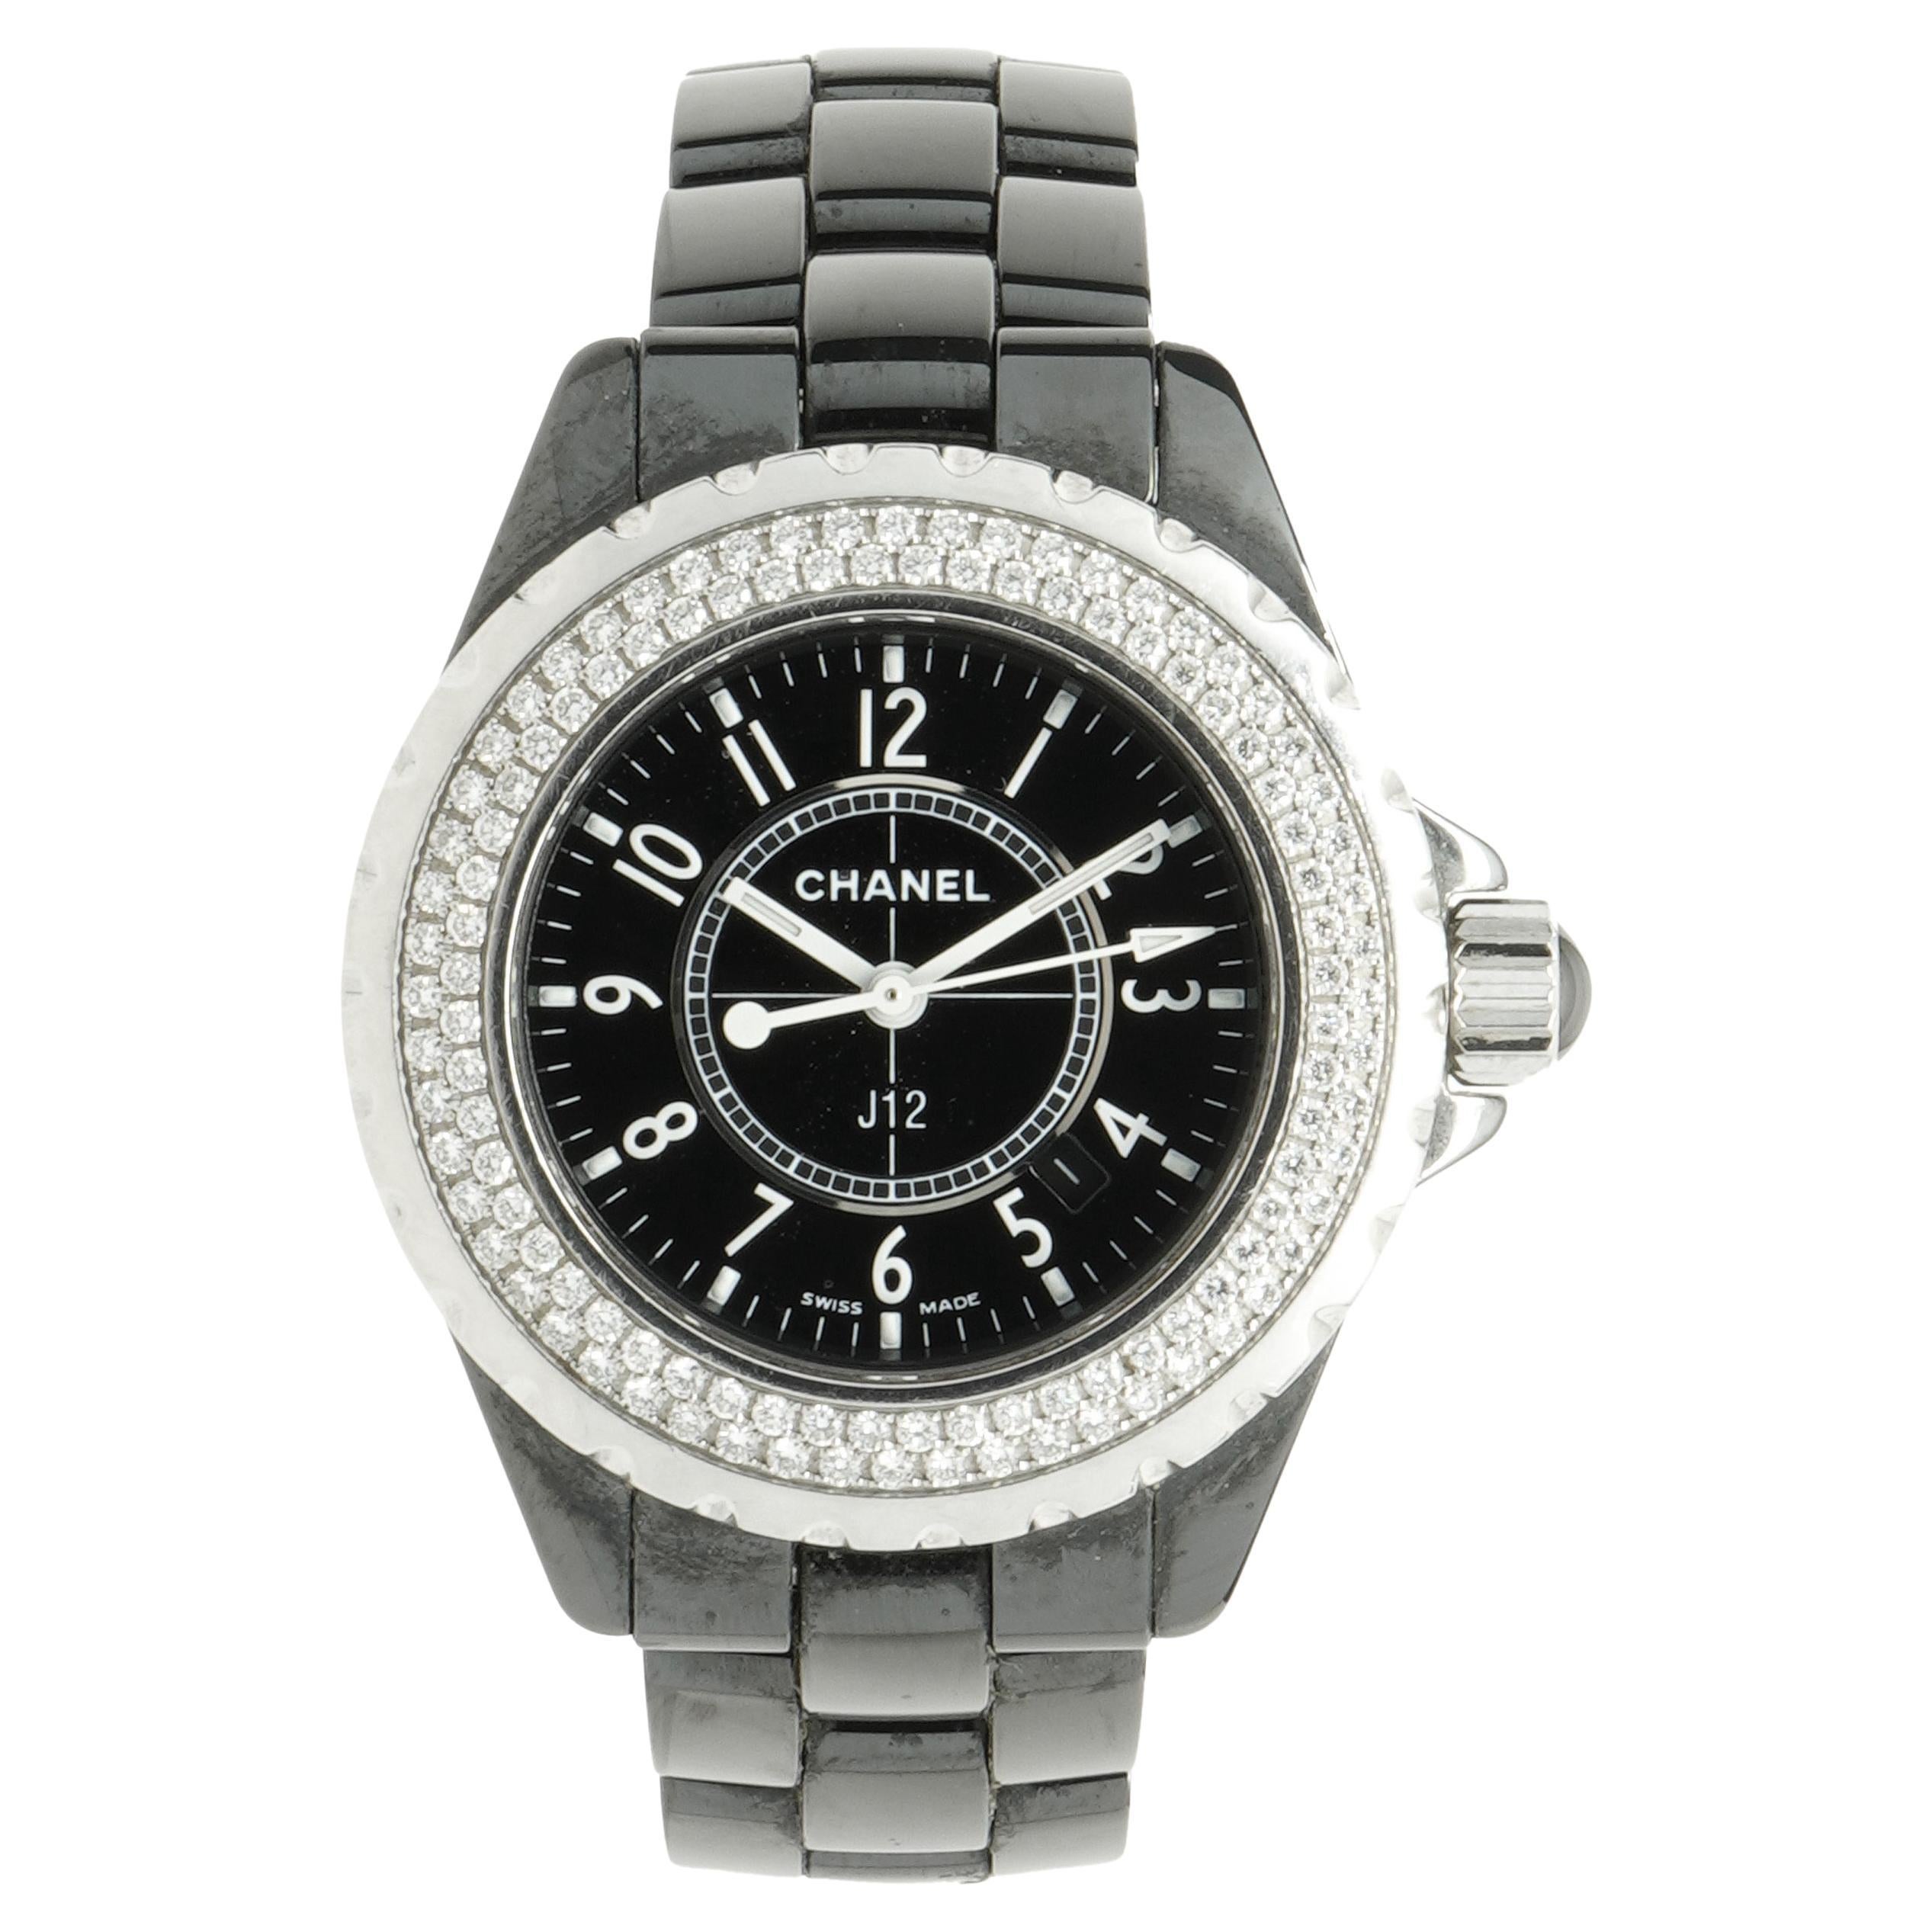 H1708 Chanel J 12 - Black Small Size with Diamonds